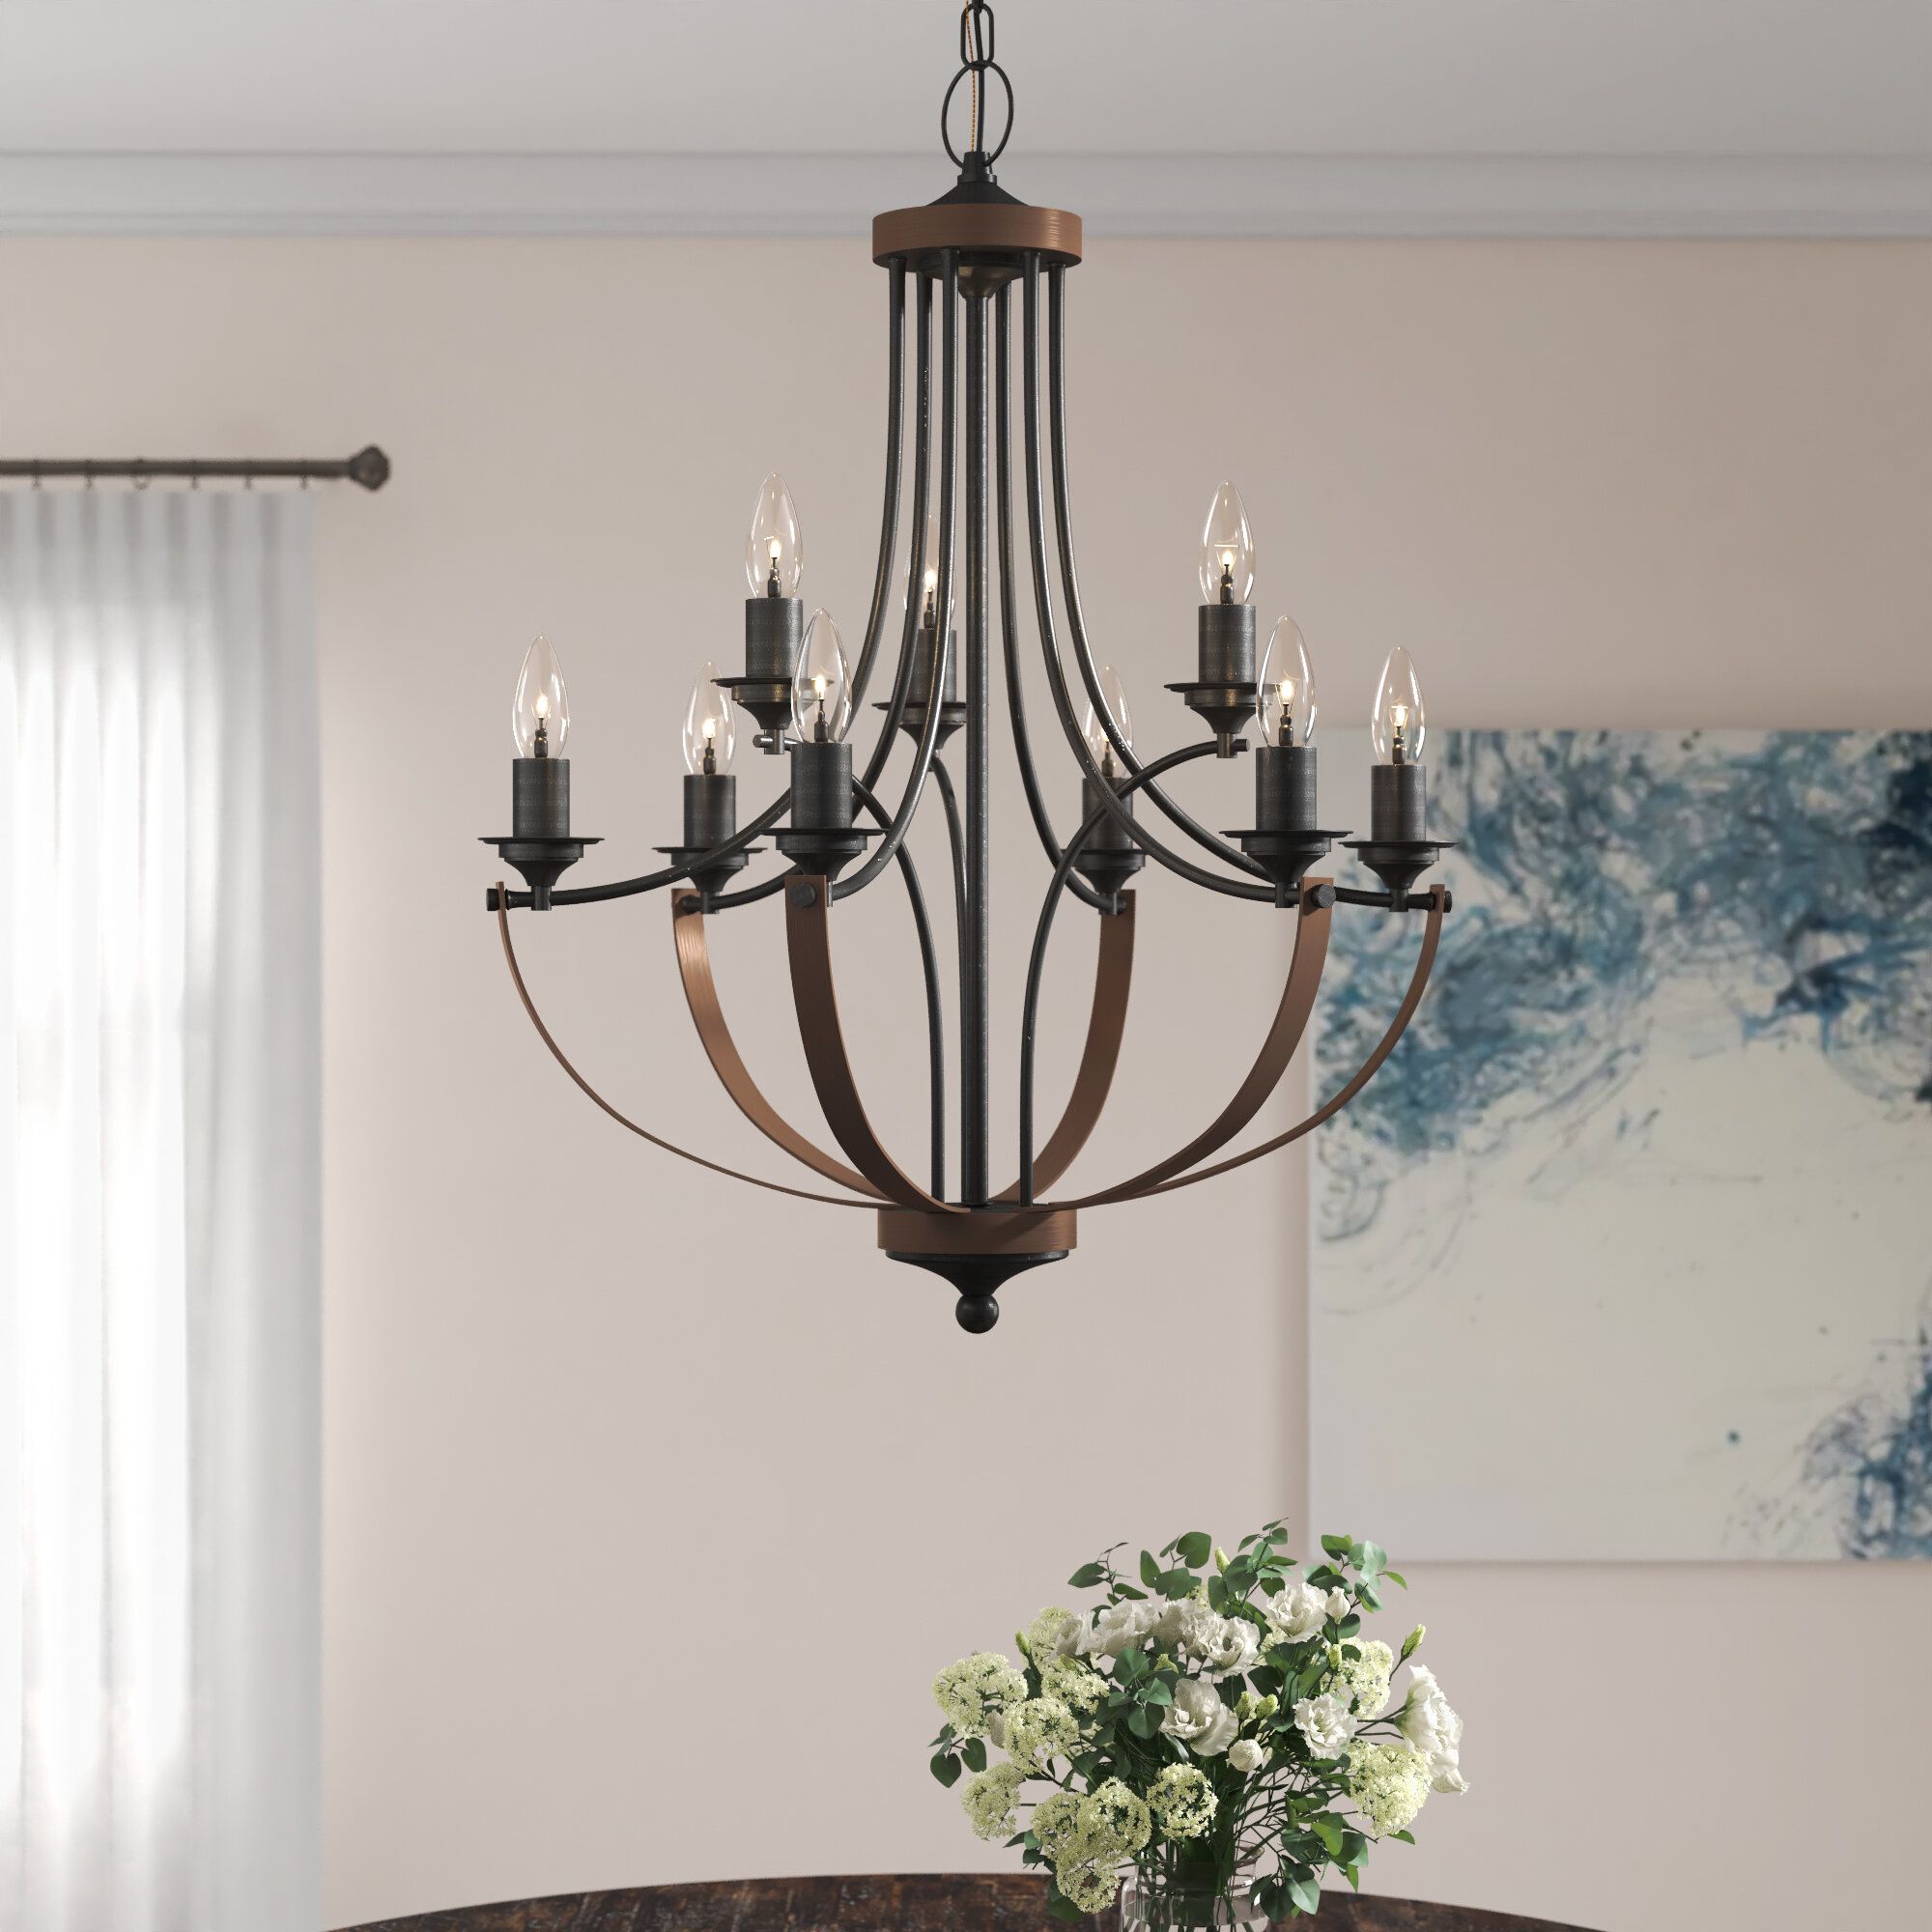 Camilla 9 Light Candle Style Chandelier Pertaining To Bennington 4 Light Candle Style Chandeliers (View 19 of 30)